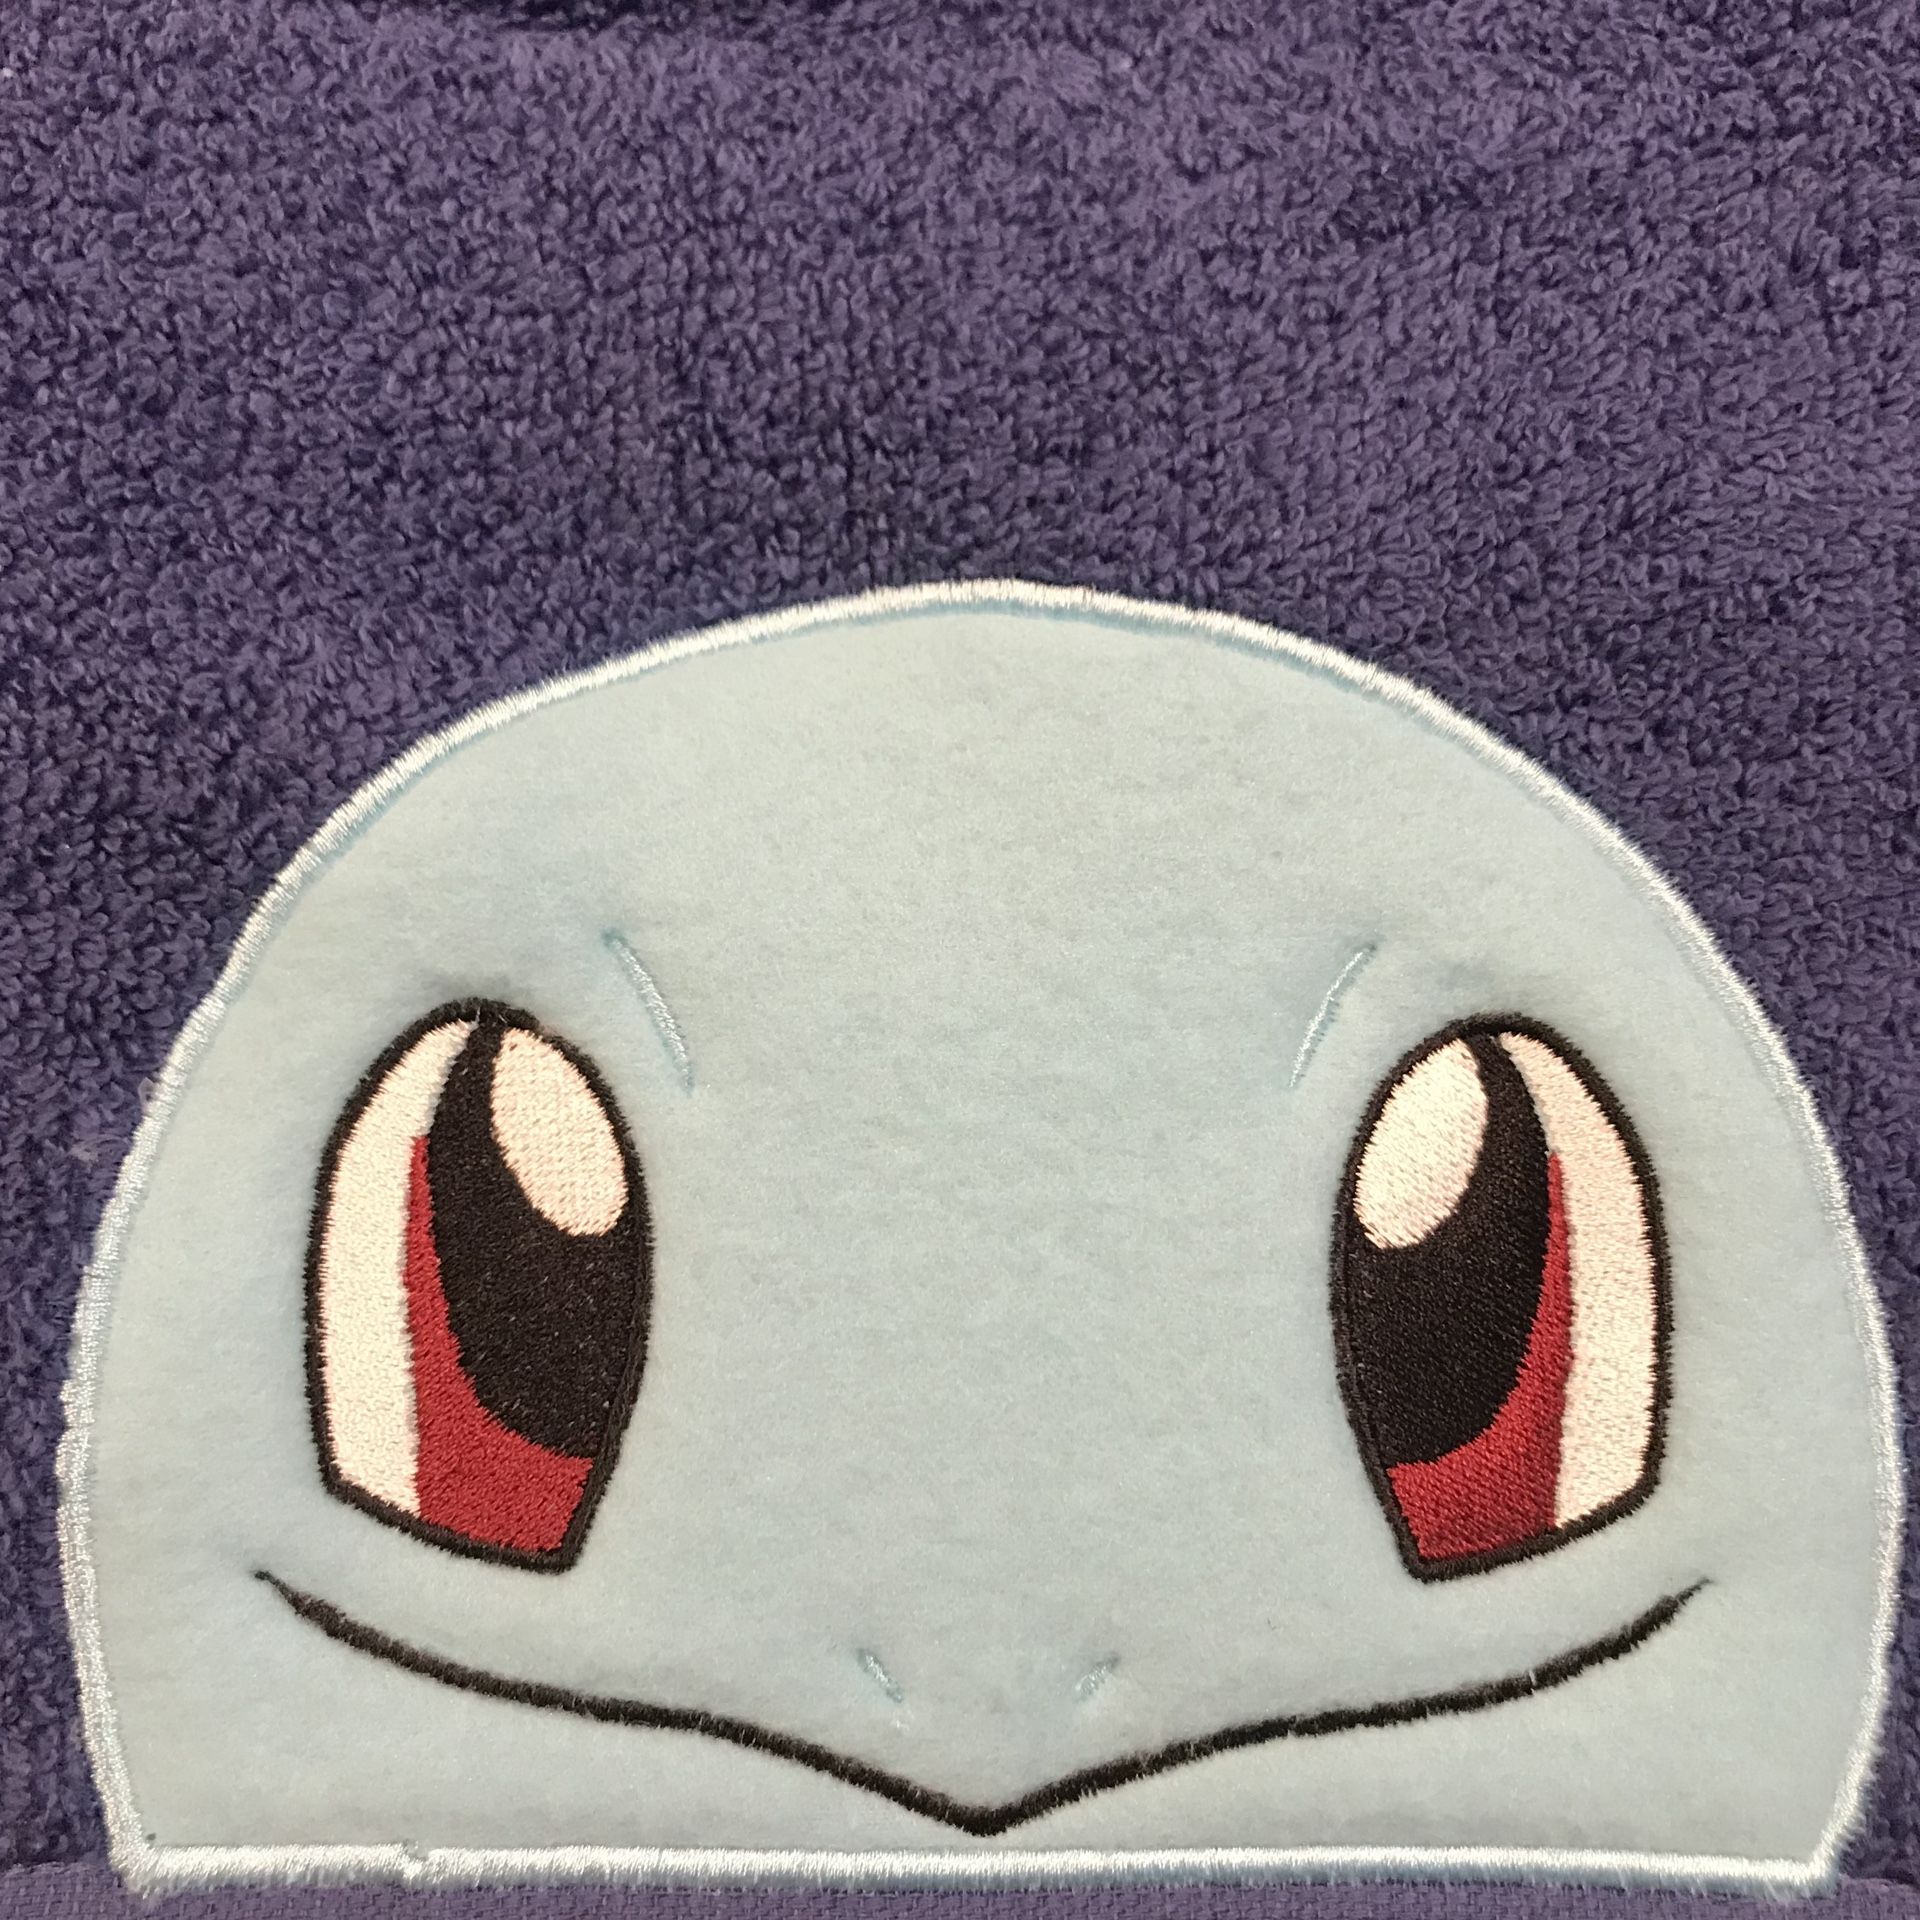 Pokémon Squirtle Inspired Hooded Towel